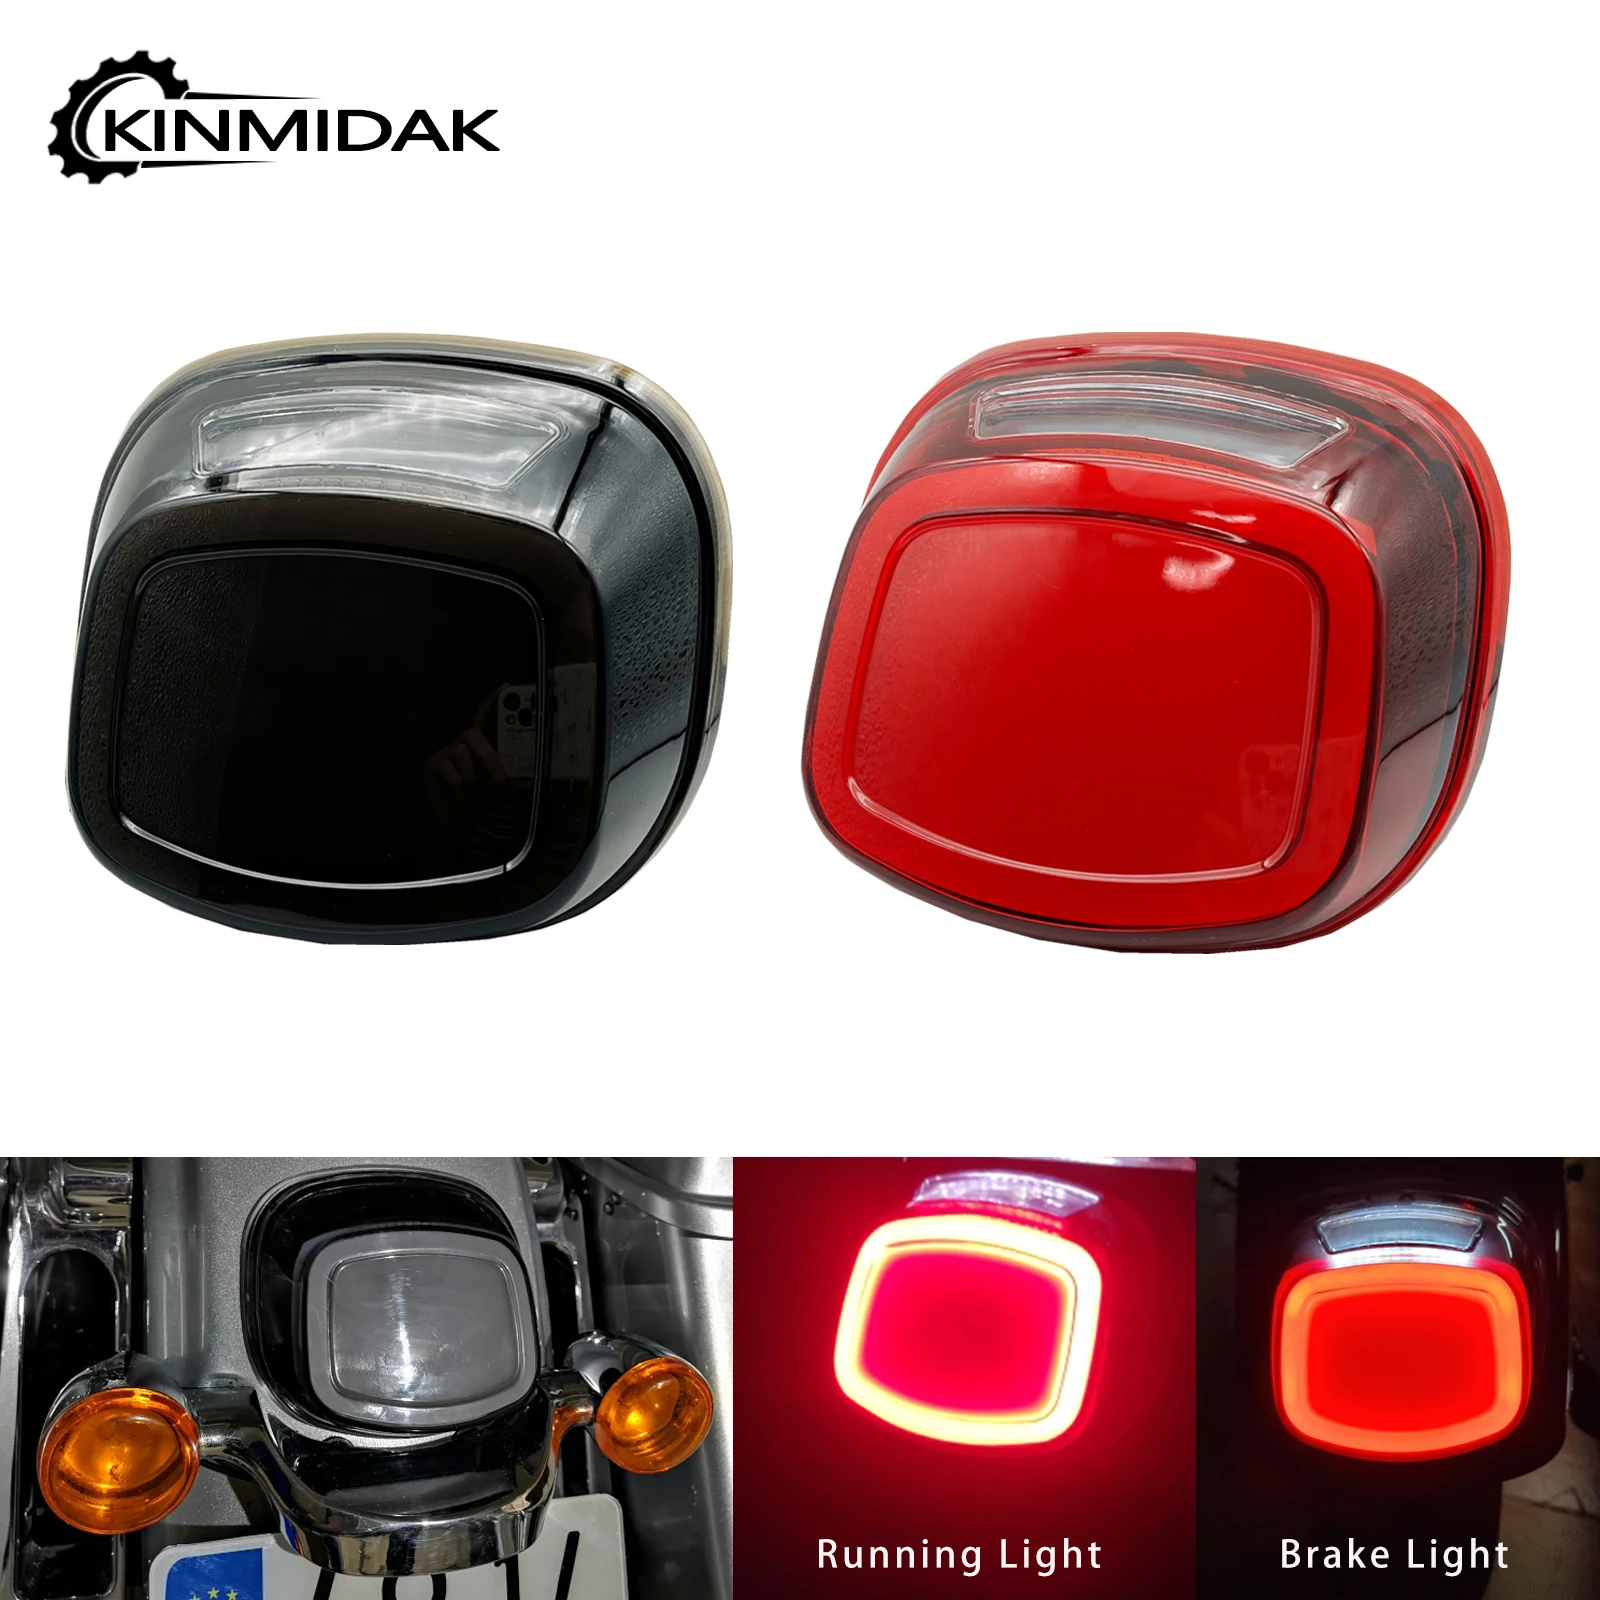 

Motorcycle LED Rear Tail Lamp Brake Running Light Red/Smoke Lens Taillight For Harley Softail Dyna Touring Sportster XL 883 1200